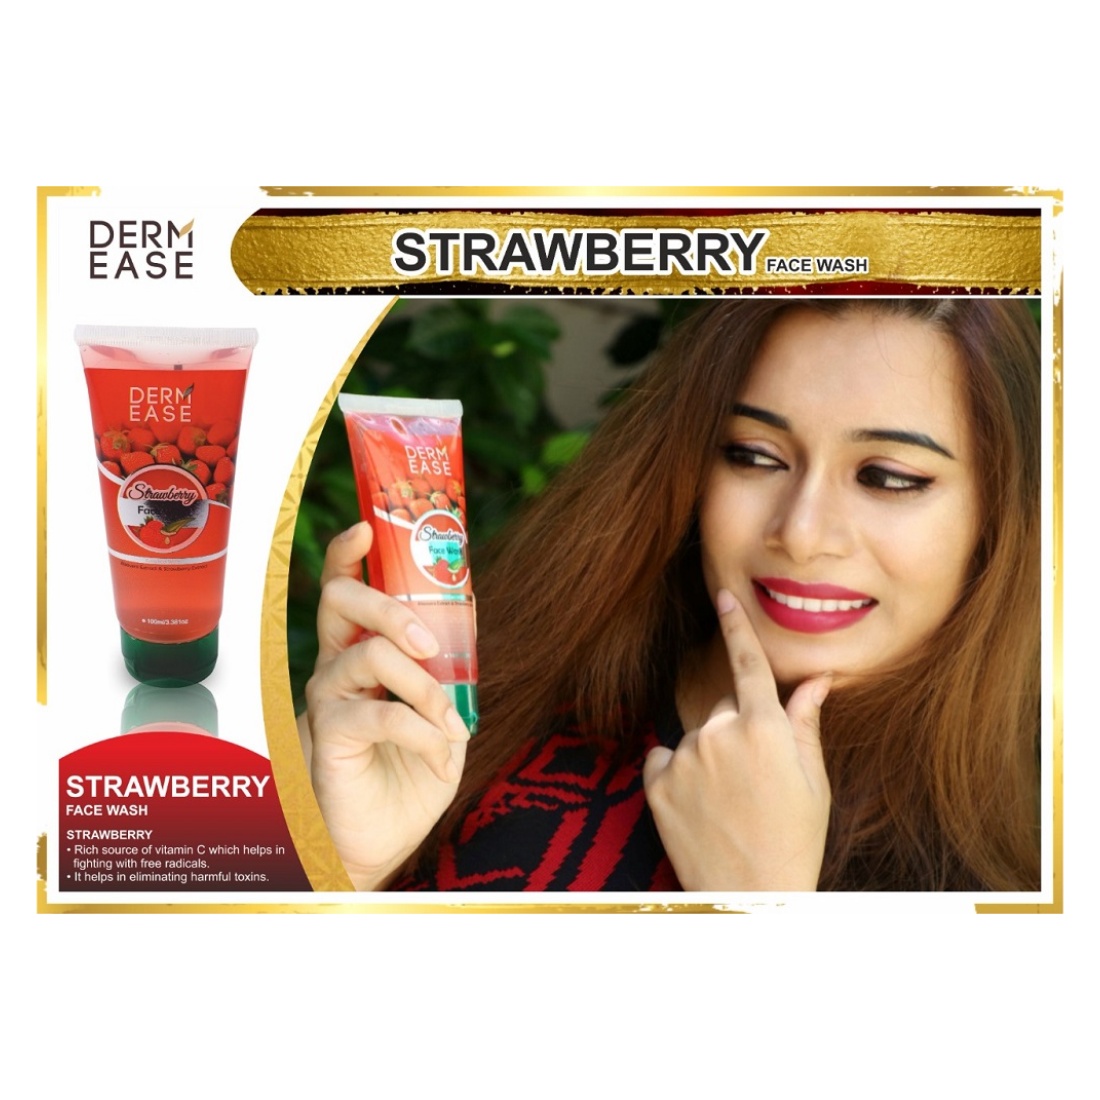 DERM EASE Strawberry Face Wash Combo